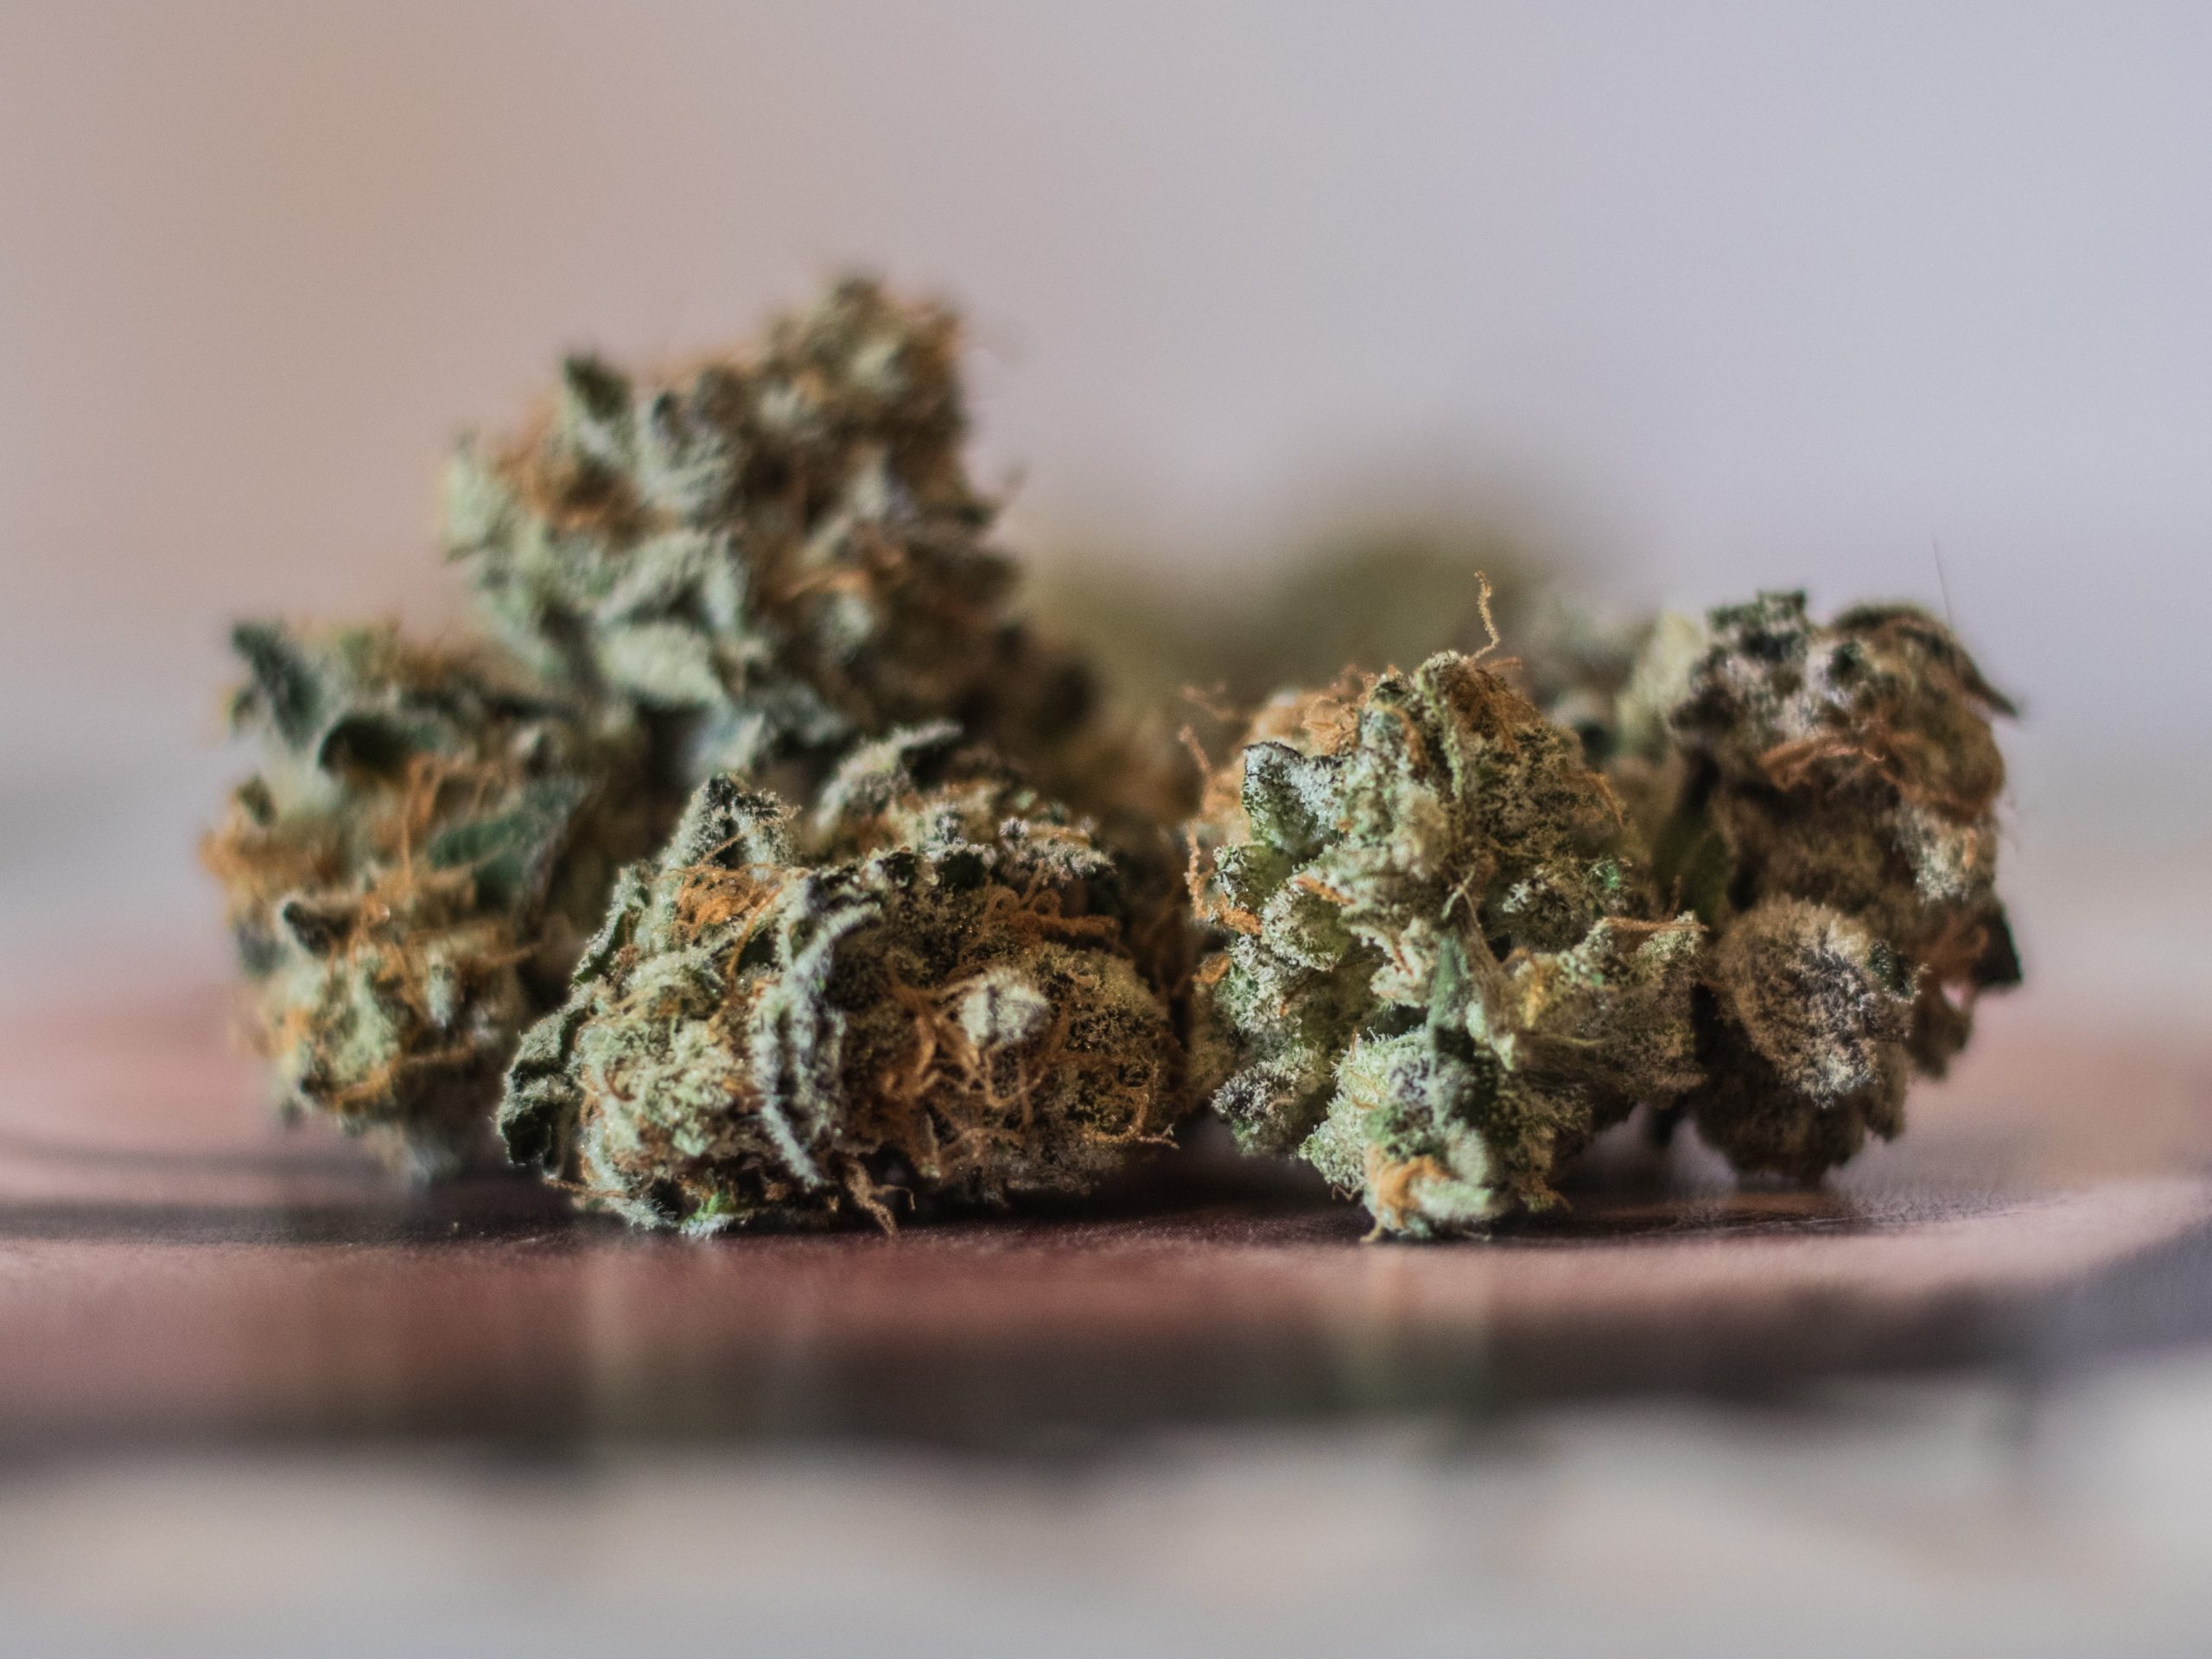 hybrid weed - hybrid strains to buy online on puffland